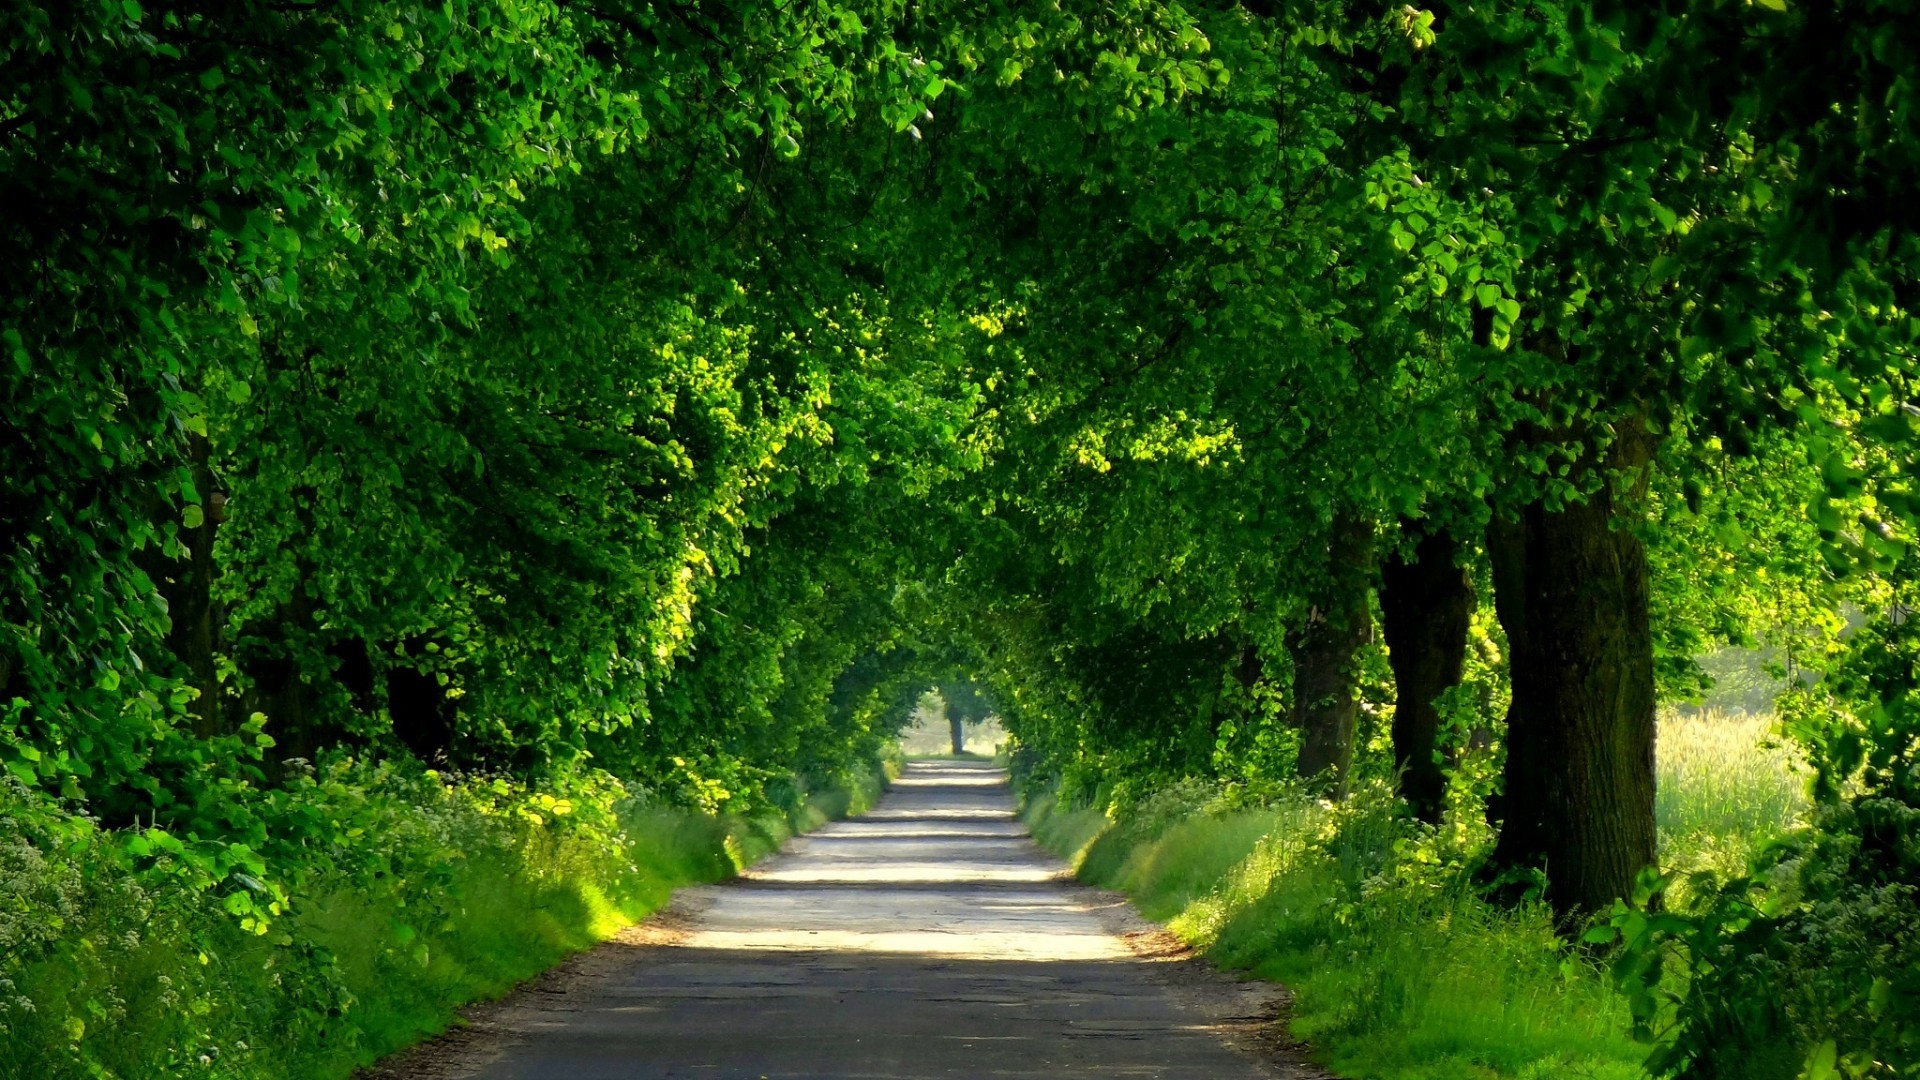 General 1920x1080 trees green foliage arch grass